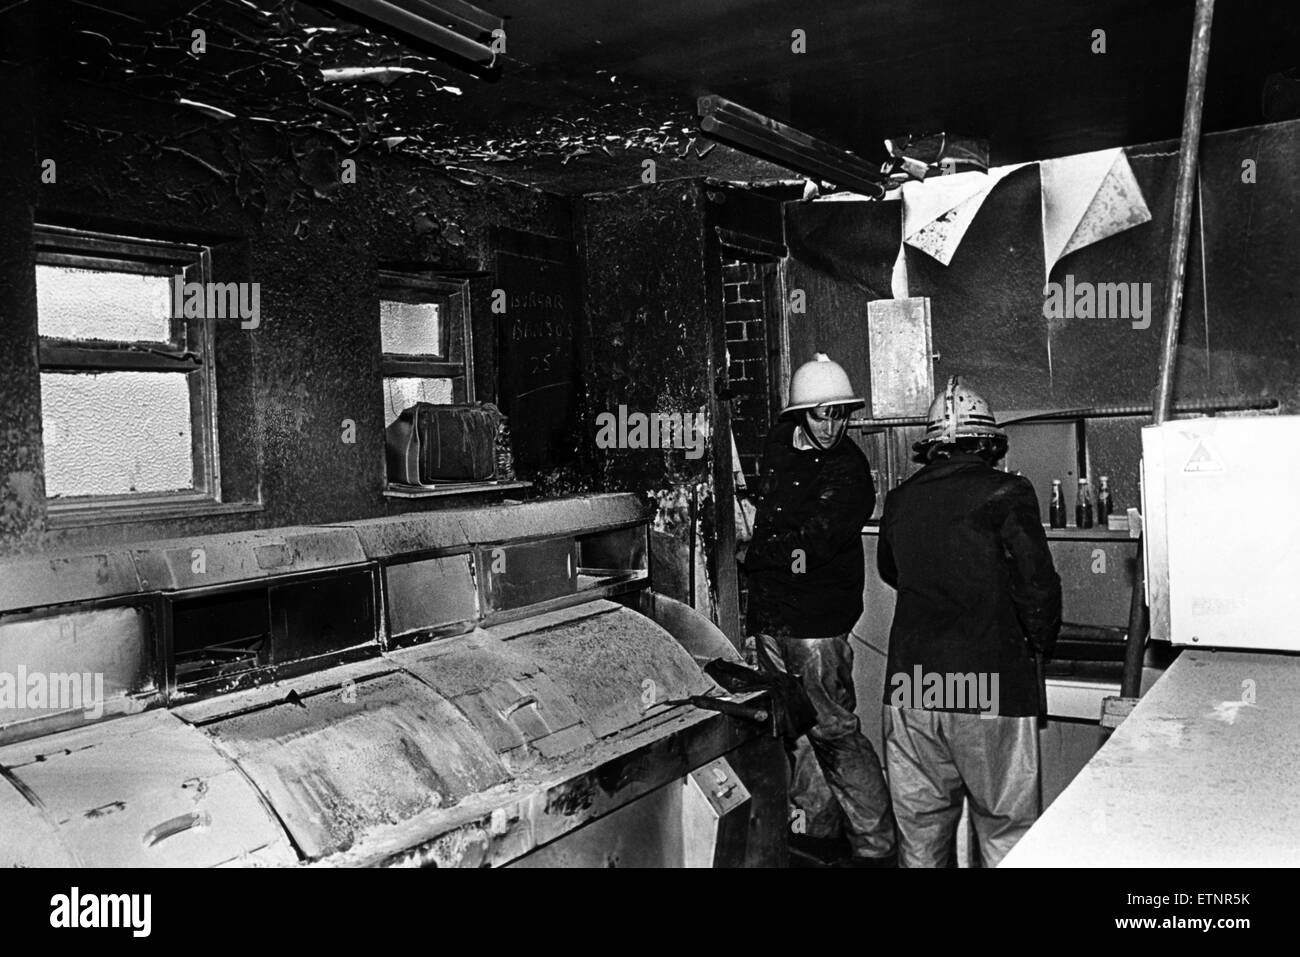 Firemen make safe the fish shop on Scurfield Road, Stockton, after extinguishing a fire caused when the fat being heated caught fire, causing extensive damage, 21st July 1980. Stock Photo